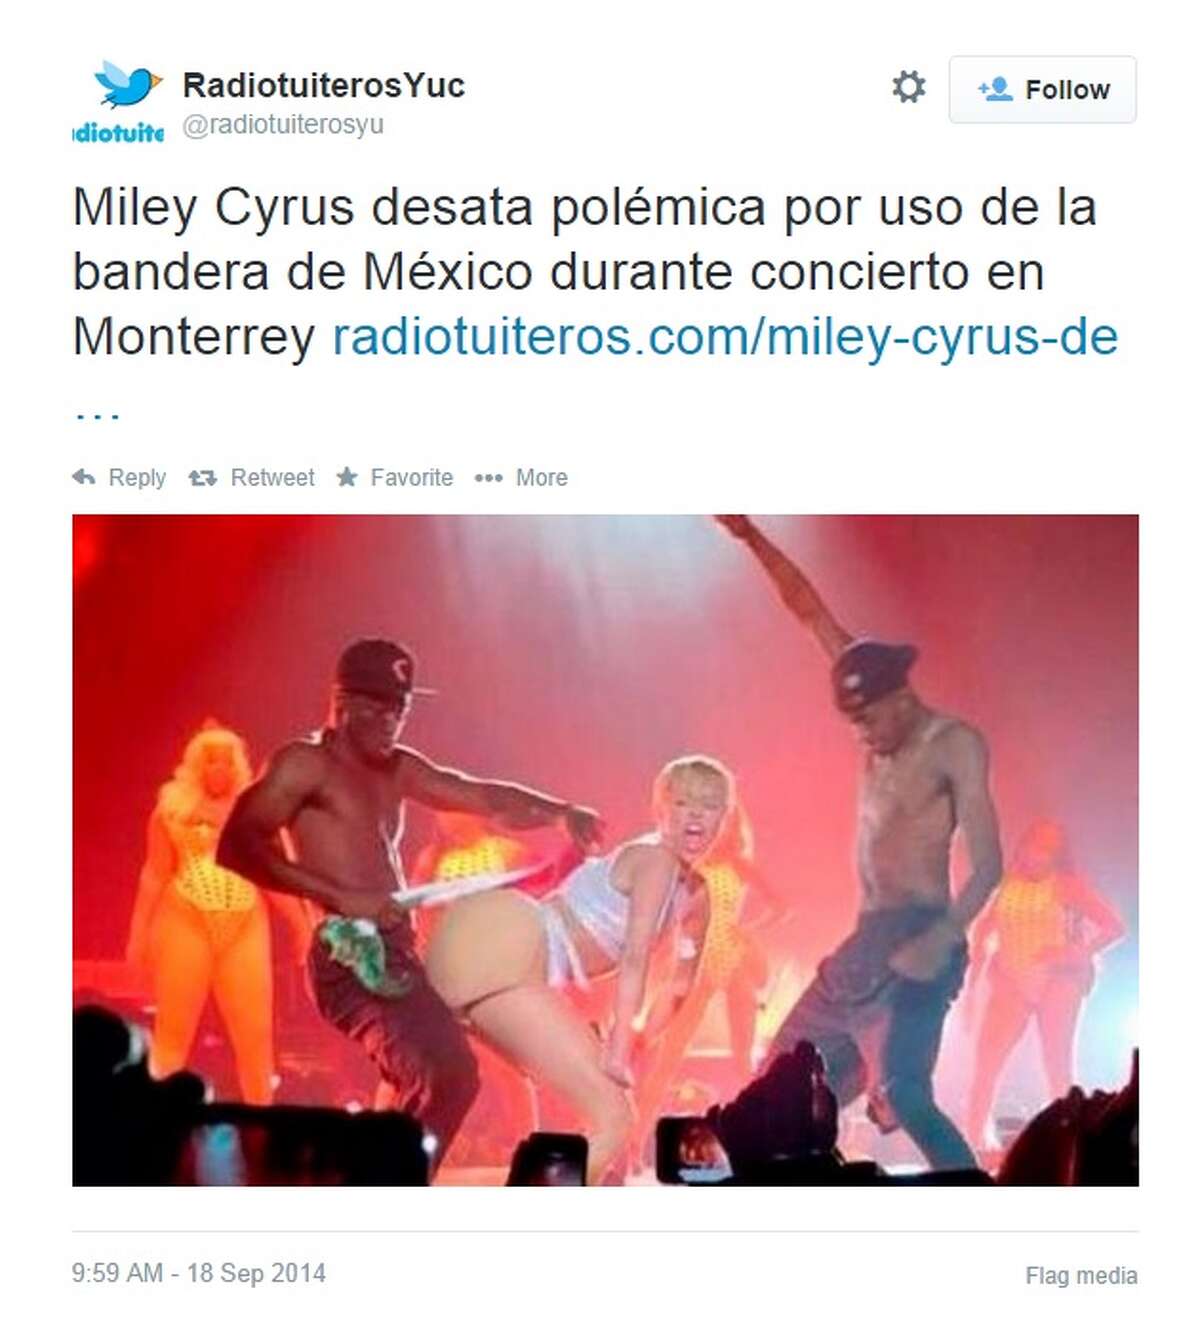 Pop star Miley Cyrus is under a criminal investigation for desecrating the Mexican flag on stage in Monterrey on September 16, 2014, which is Mexican Independence Day.